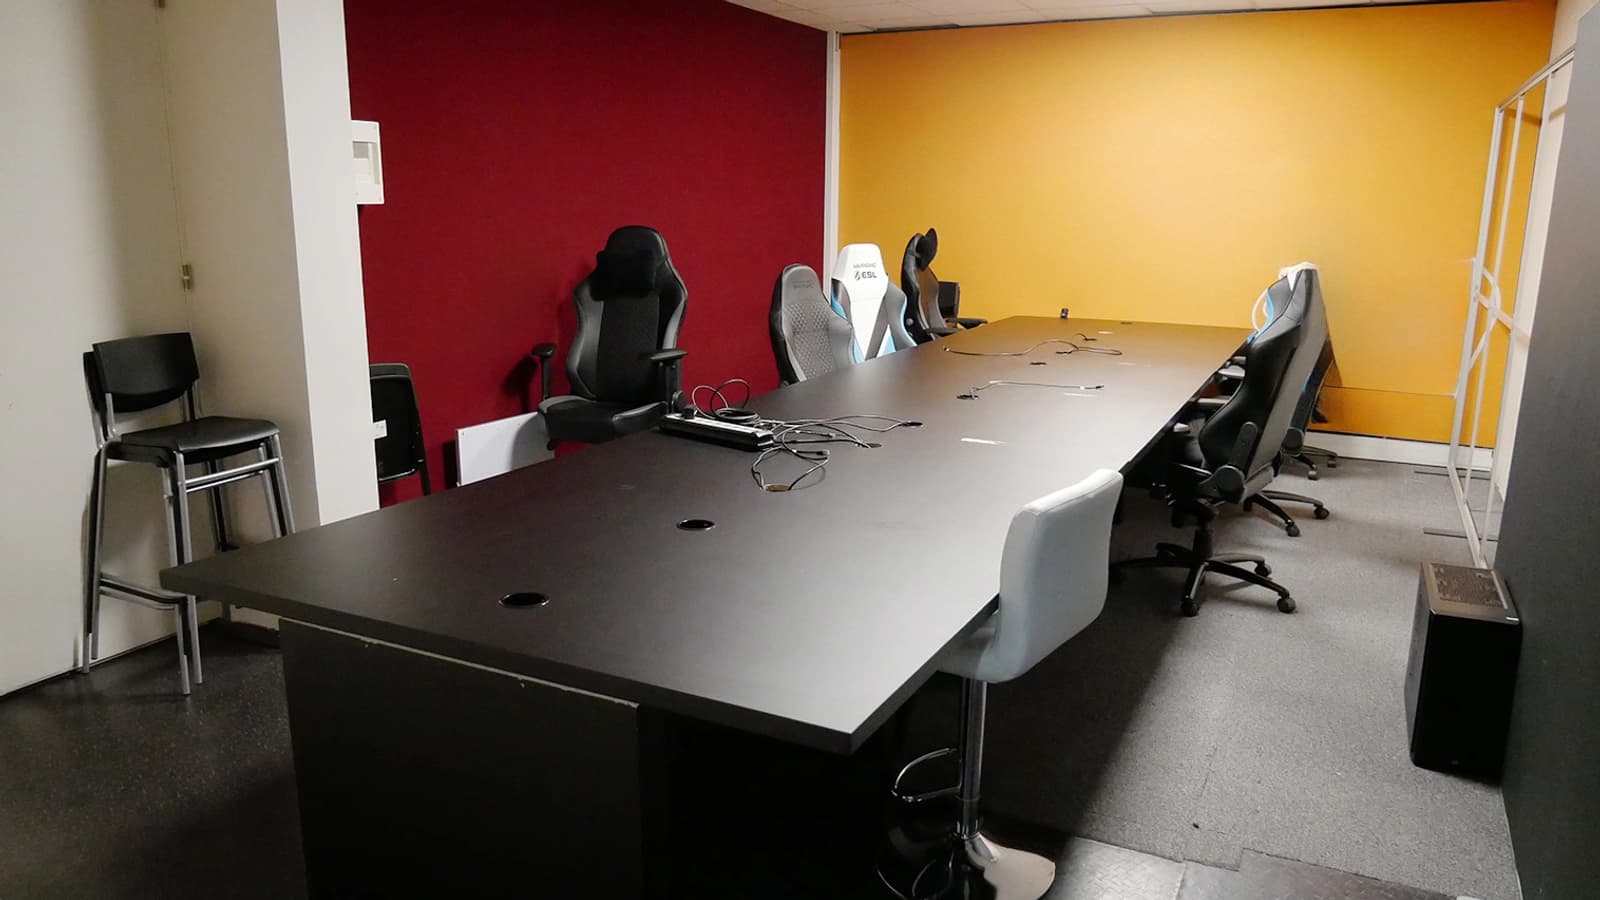 Space TV studio with meeting rooms - 4